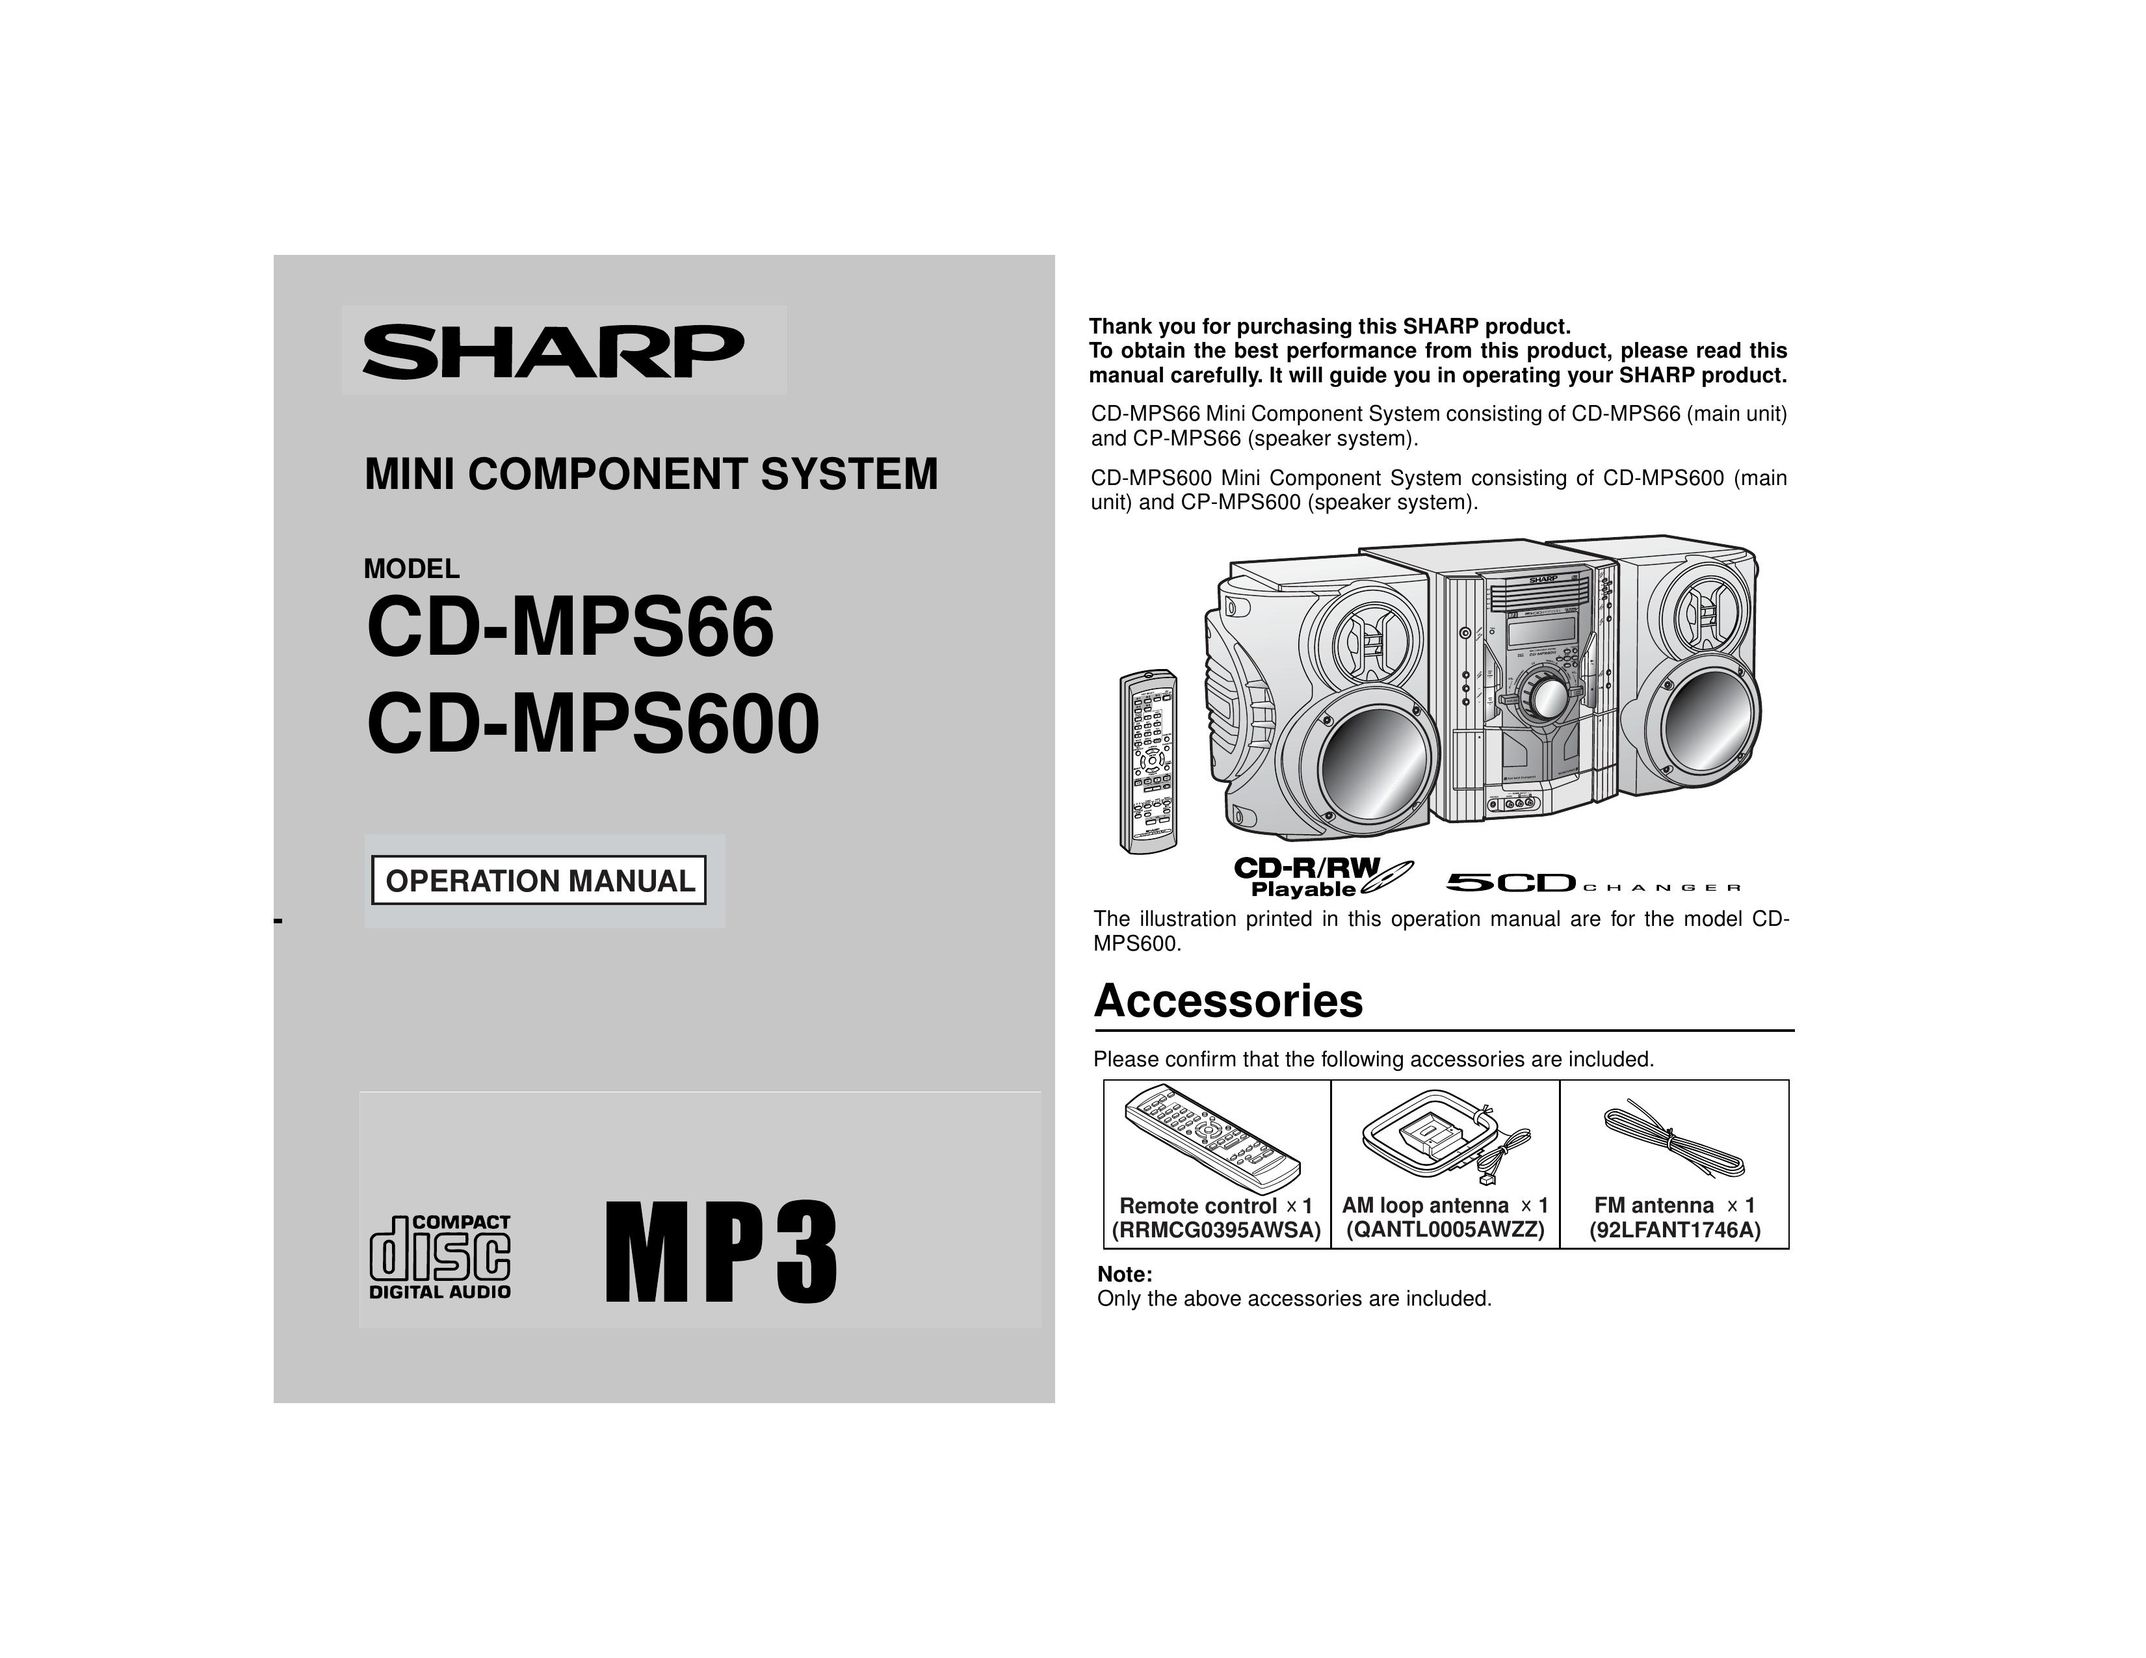 Sharp CD-MPS66 Stereo System User Manual